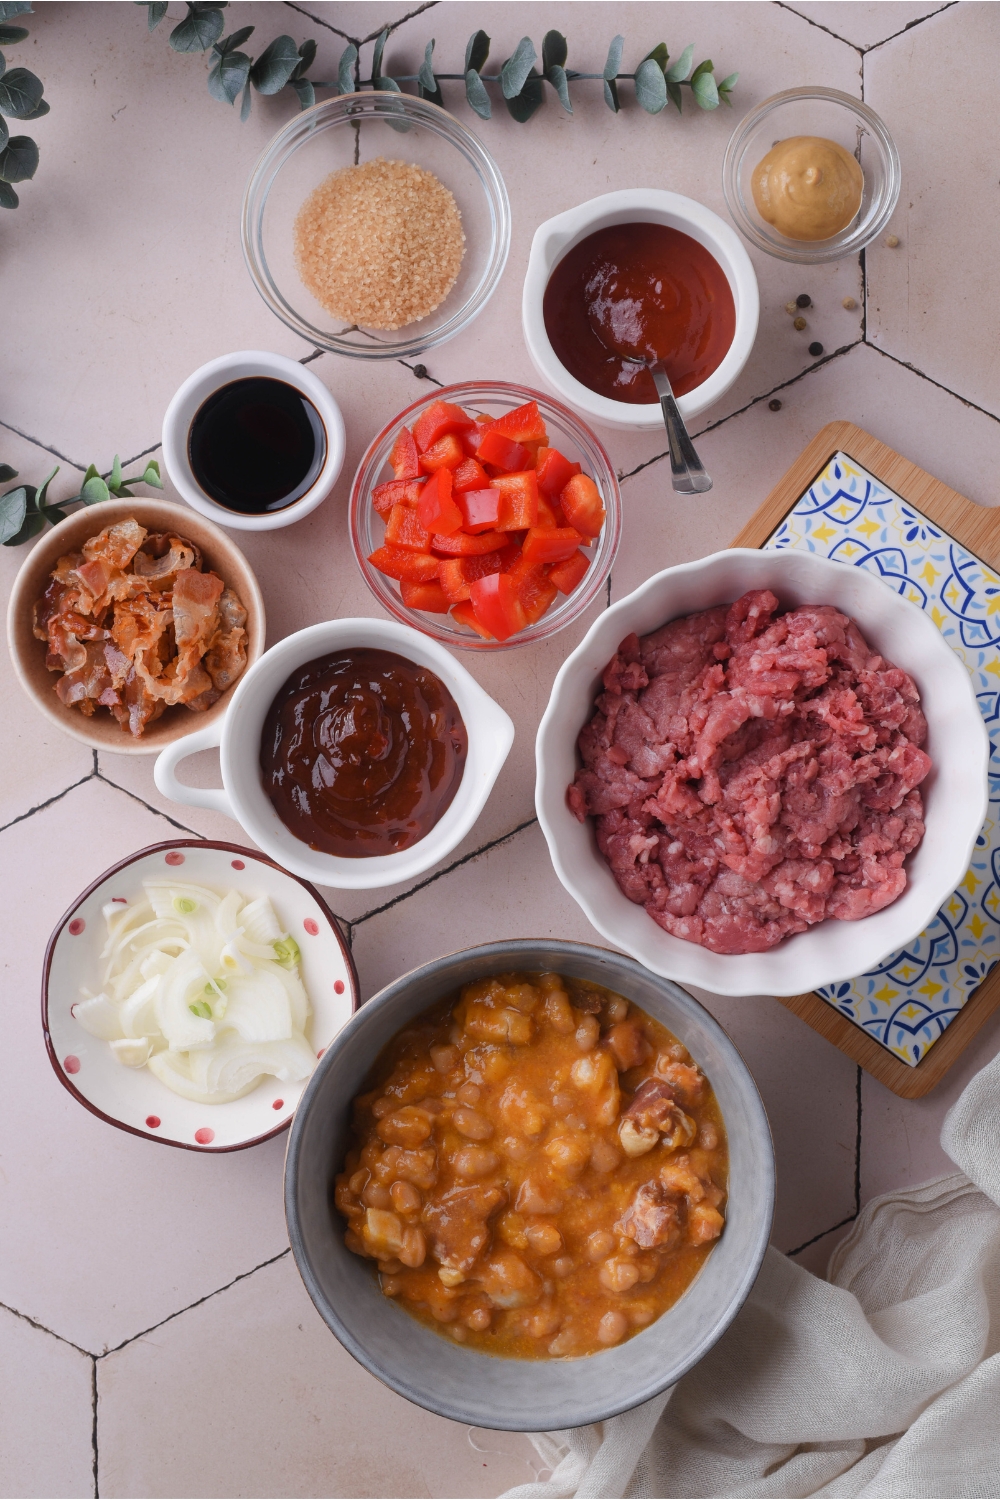 An assortment of ingredients including bowls of ground beef, diced peppers, barbecue sauce, diced onion, and canned beans.